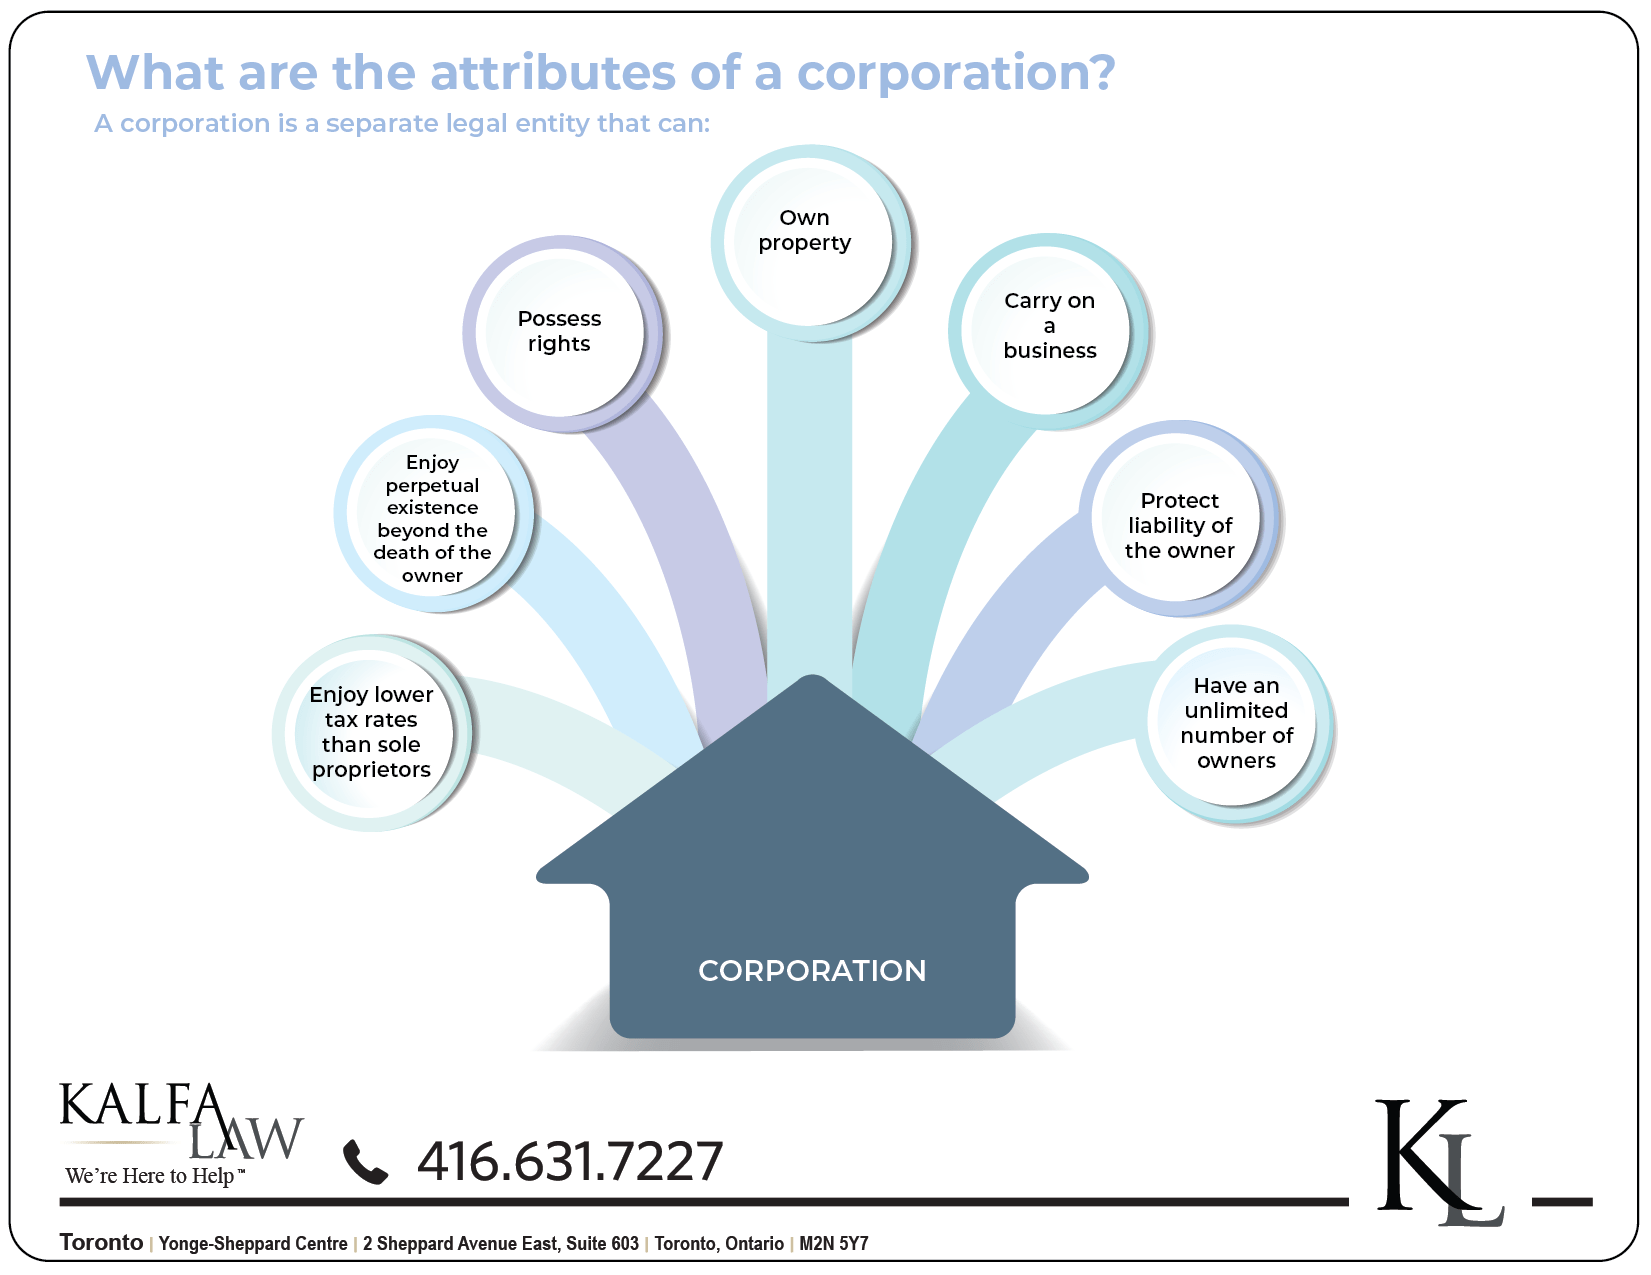 Attributes of a Corporation